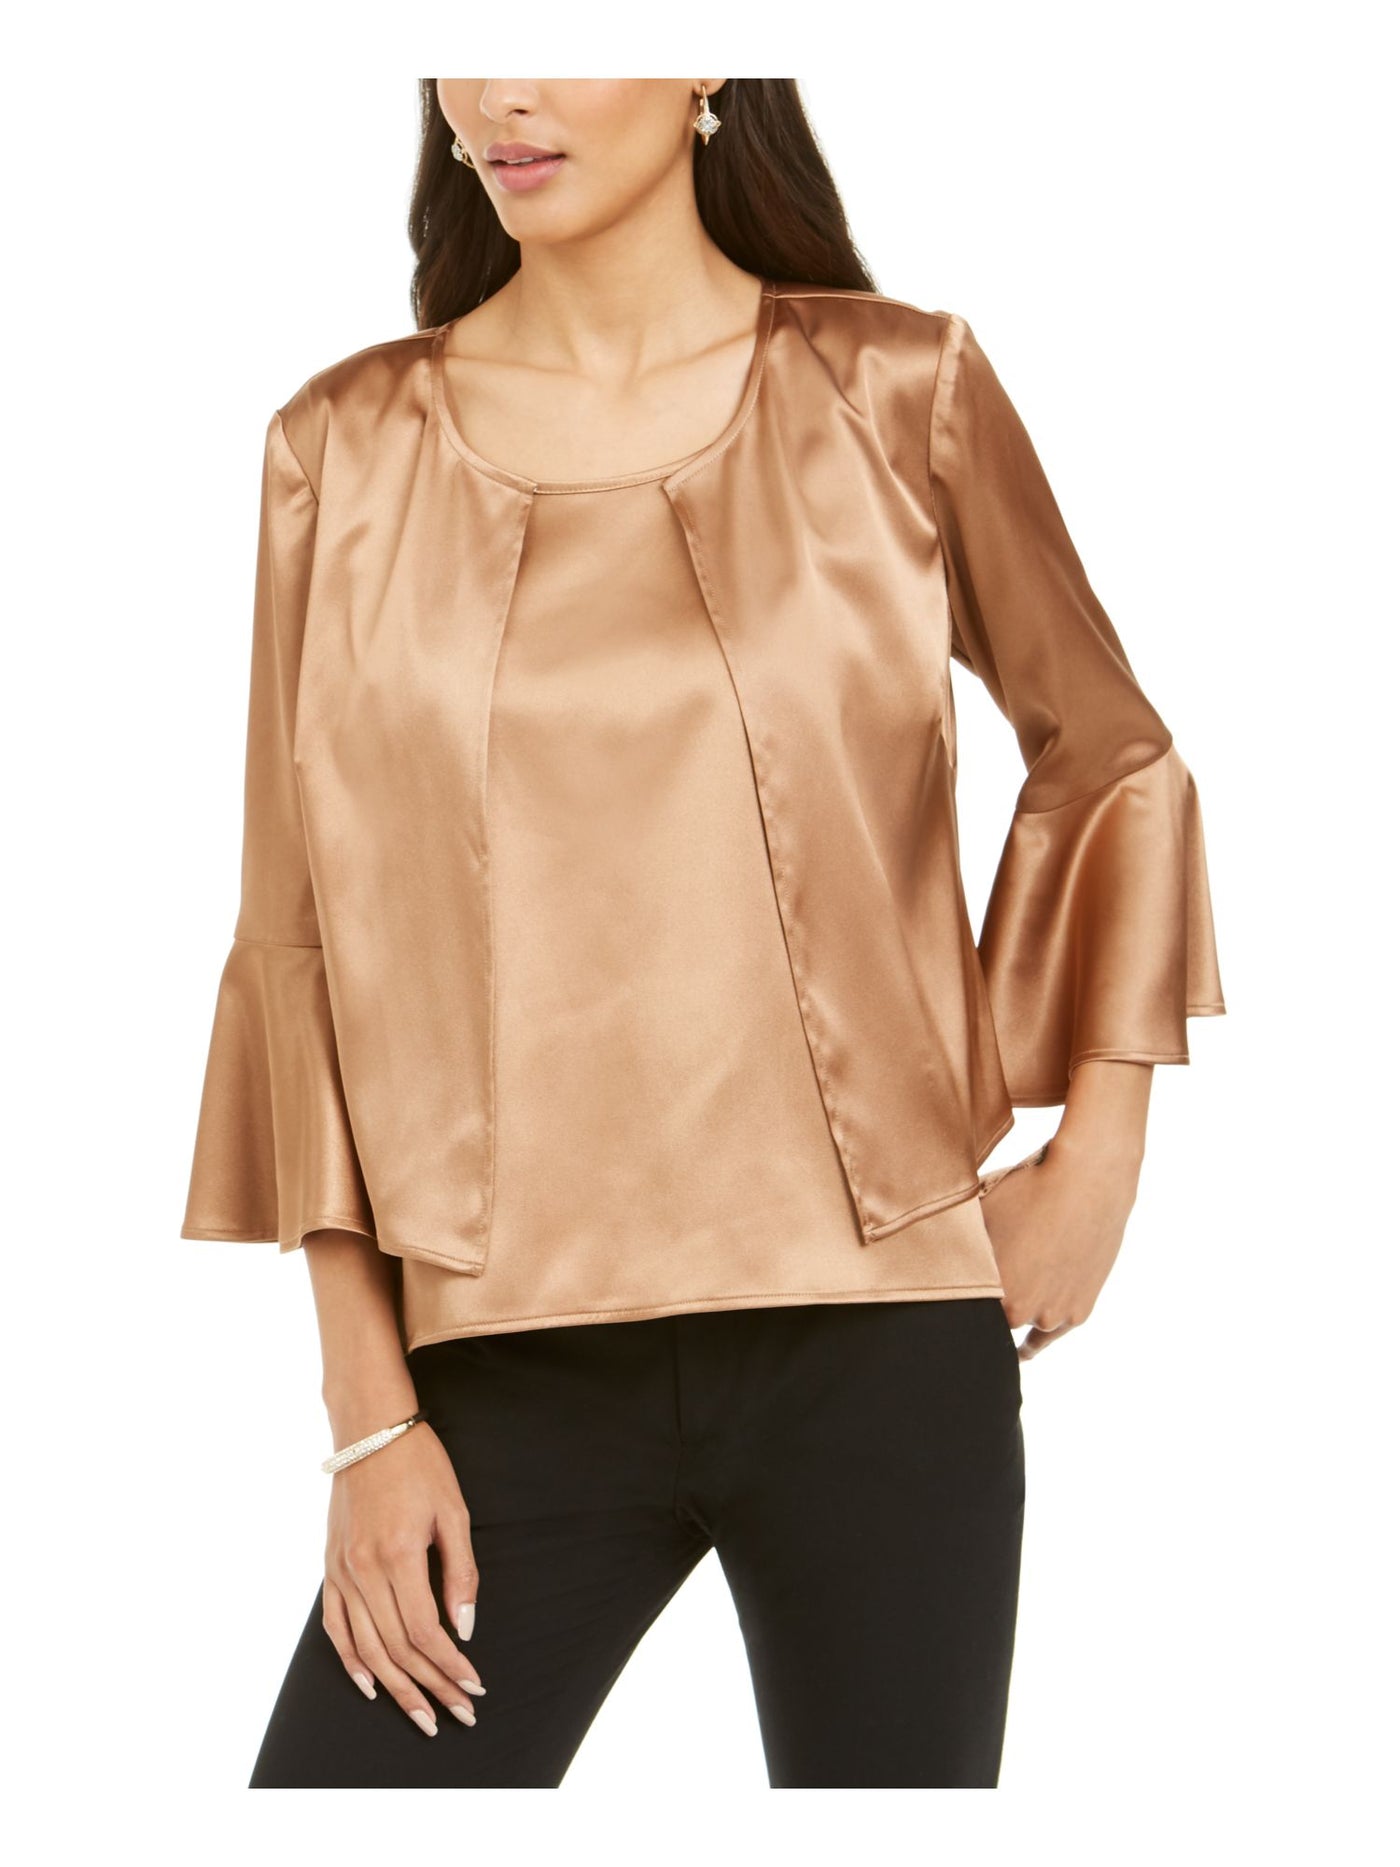 28th & Park Womens 3/4 Sleeve Jewel Neck Party Blouse Juniors